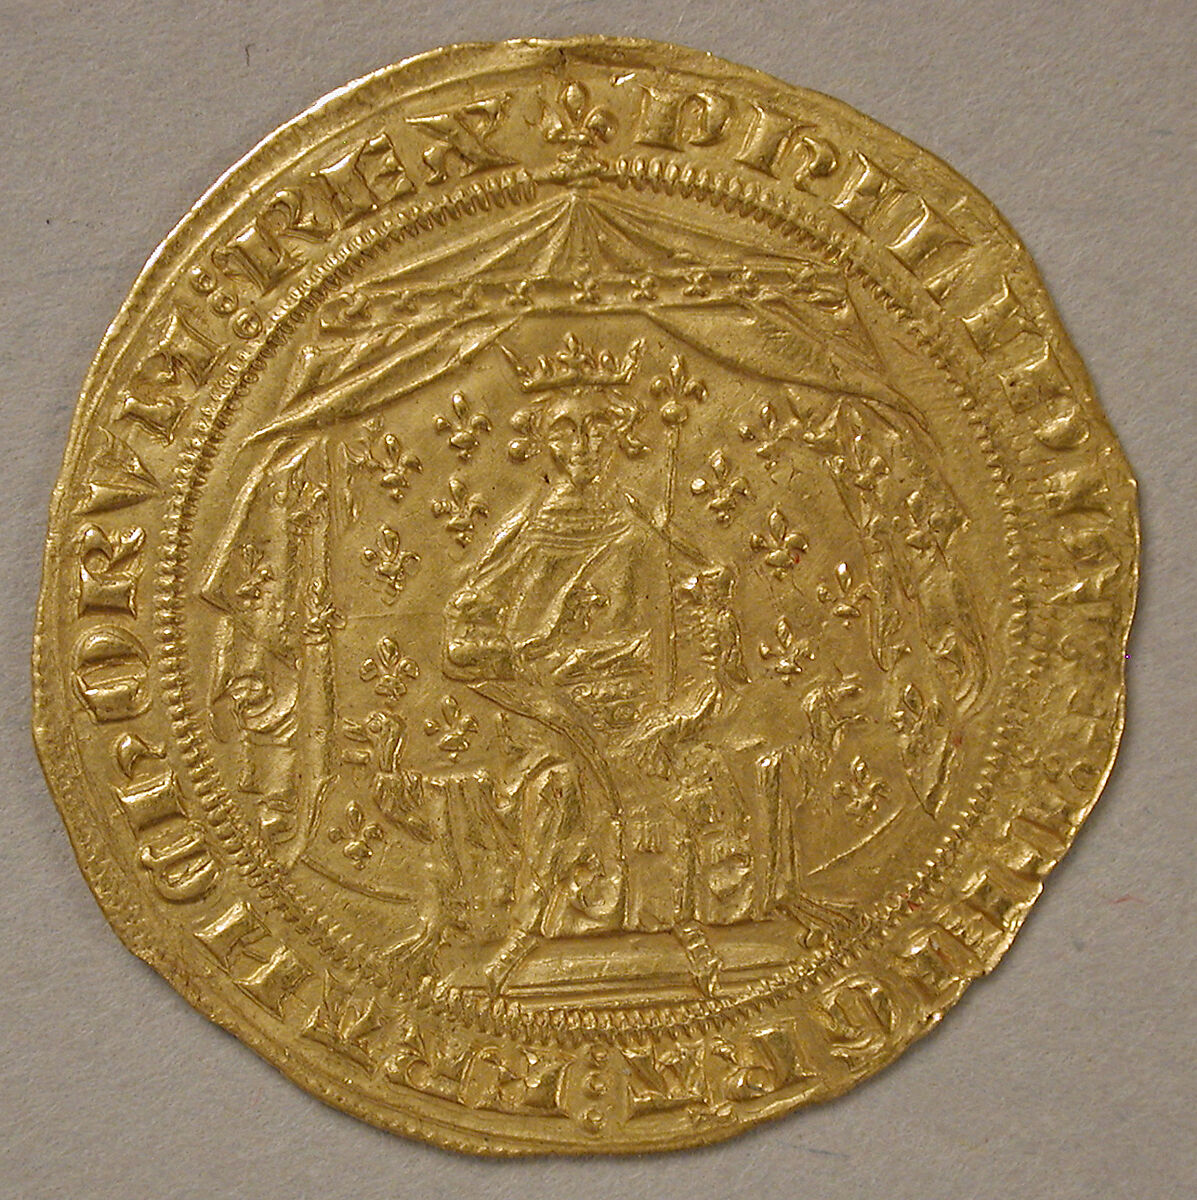 Pavillion D'or of Philip VI, Gold, French 